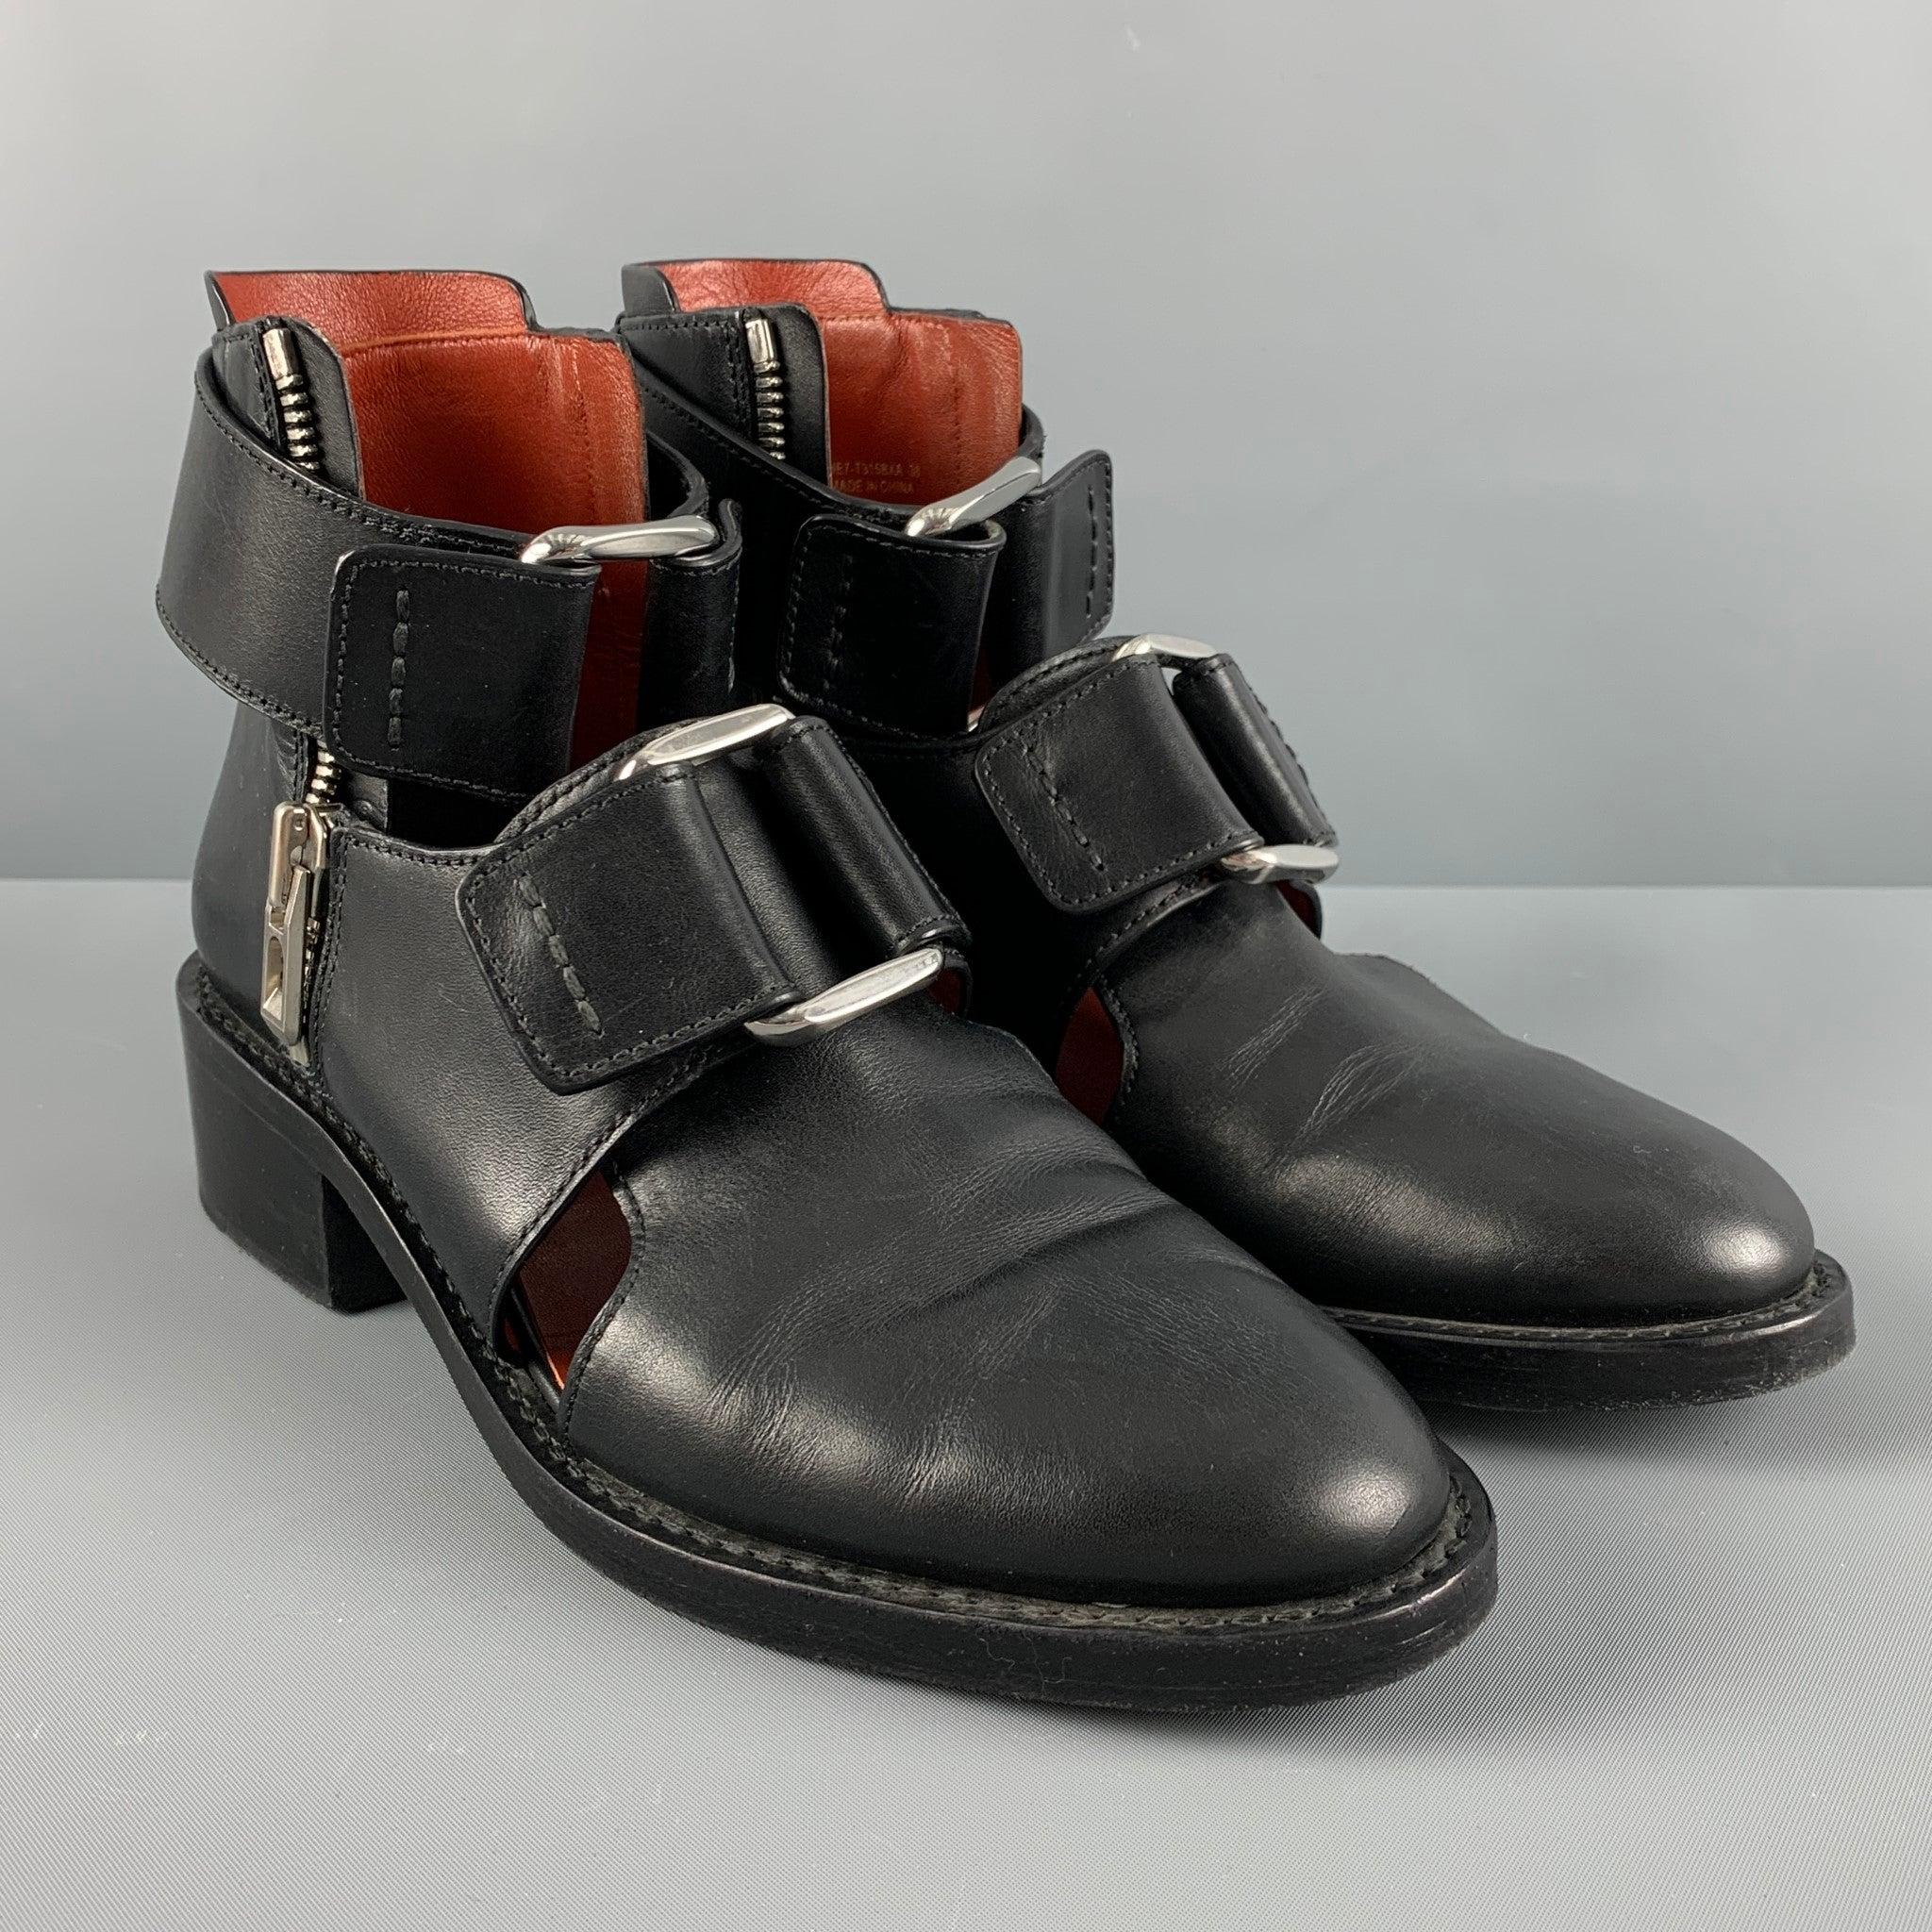 3.1 PHILLIP LIM ADDIS ankle boots comes in a black leather with cut out details featuring a silver tone buckles, slip on, and a wooden sole. Comes with Box.Very Good Pre-Owned Condition. 

Marked:   SHE7- T3158XA 38 

Measurements: 
  Length: 10.75